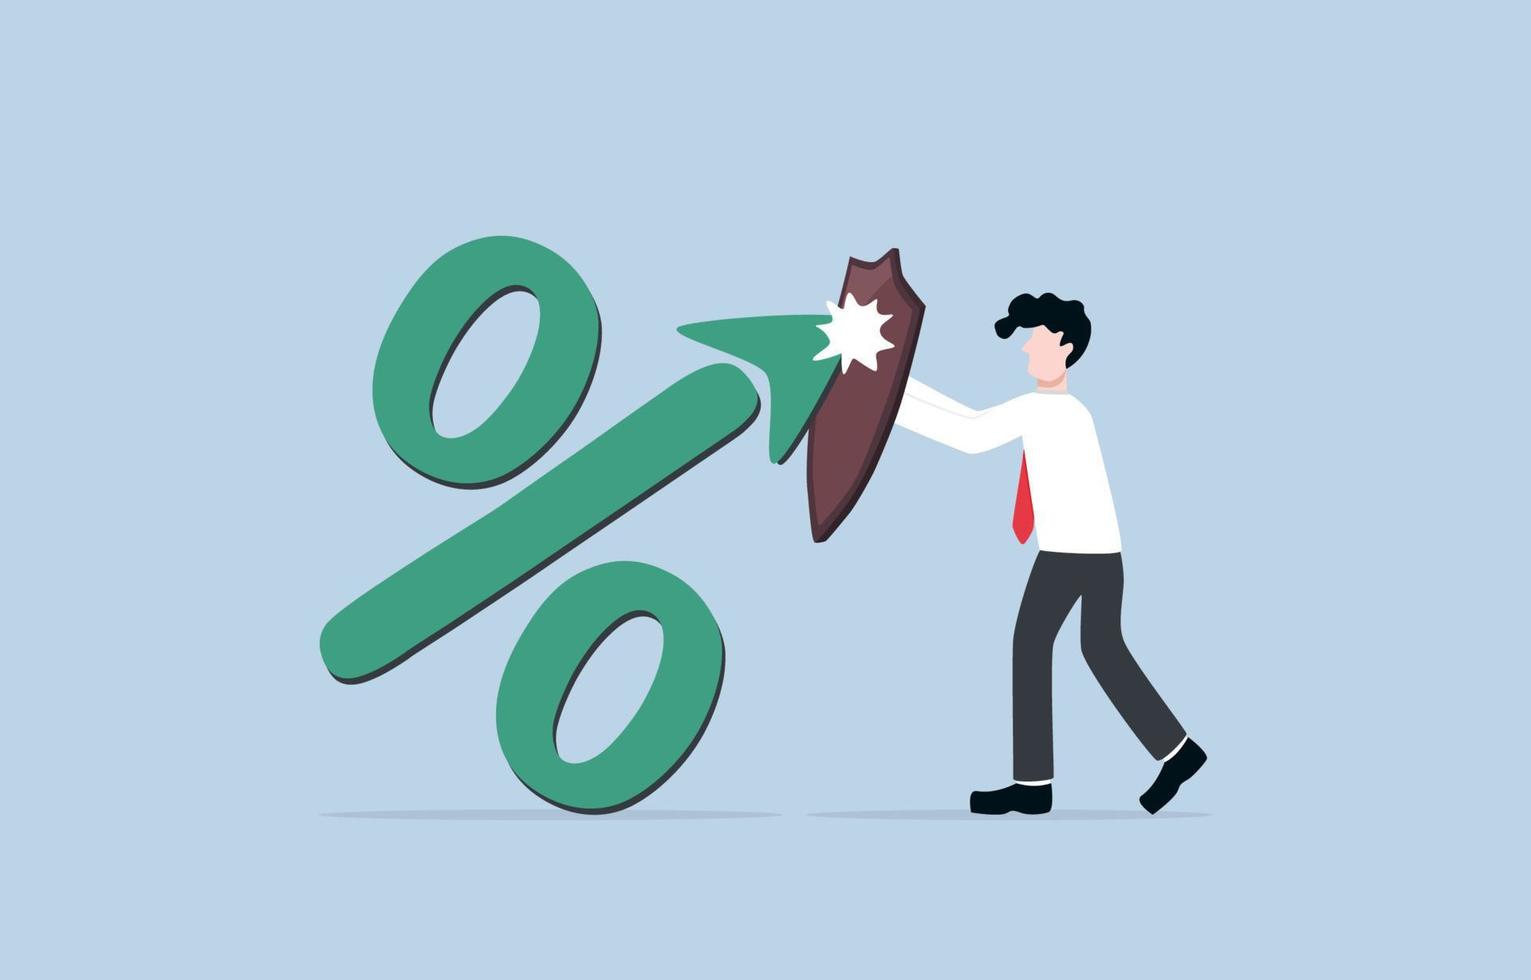 Measures to prevent high inflation from government or central bank, federal reserve policy to maintain economy concept. Businessman holding shield to face percent up arrow symbol. vector